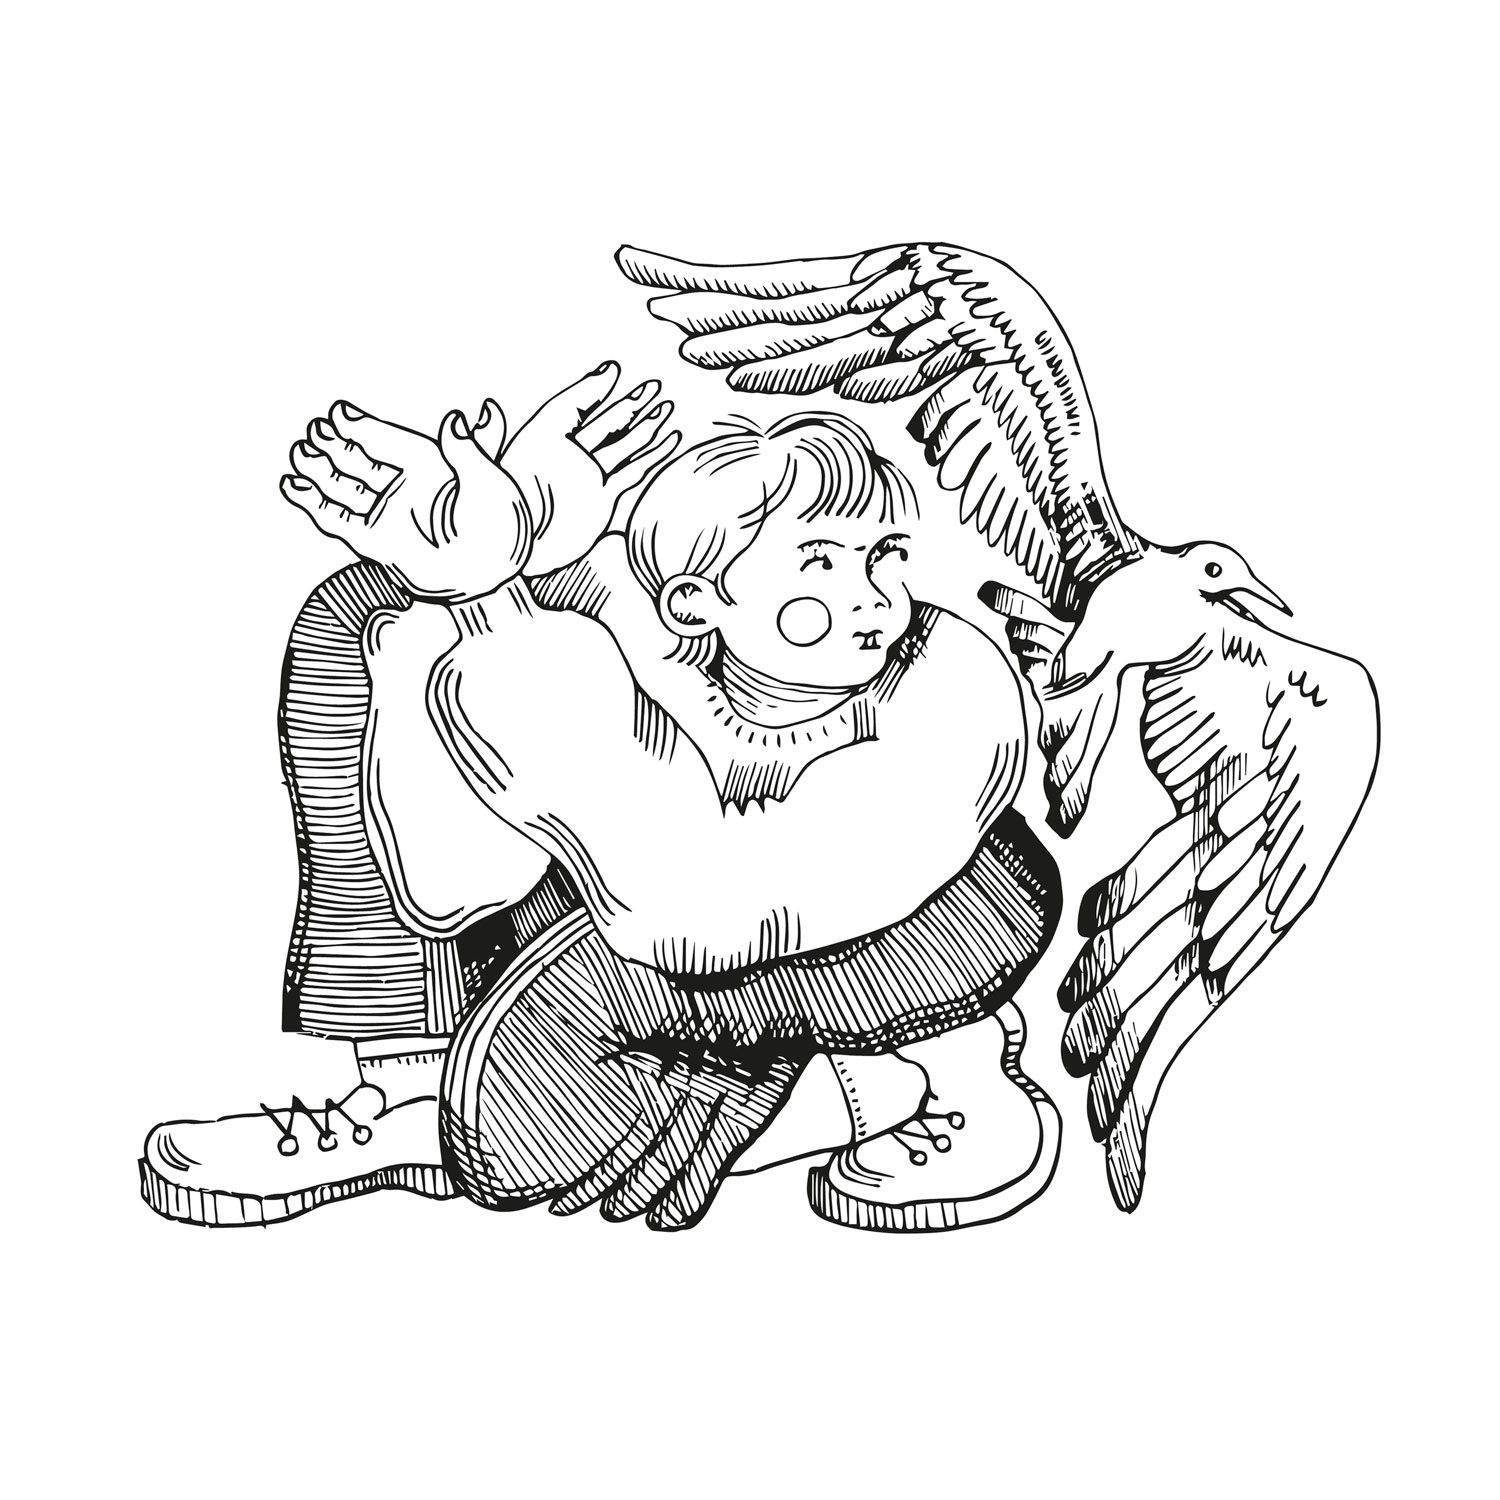 Digitally vectorized black and white illustration with the title 'Bird'. Depiction of a child playing with his hands to imitate a bird flying beside him